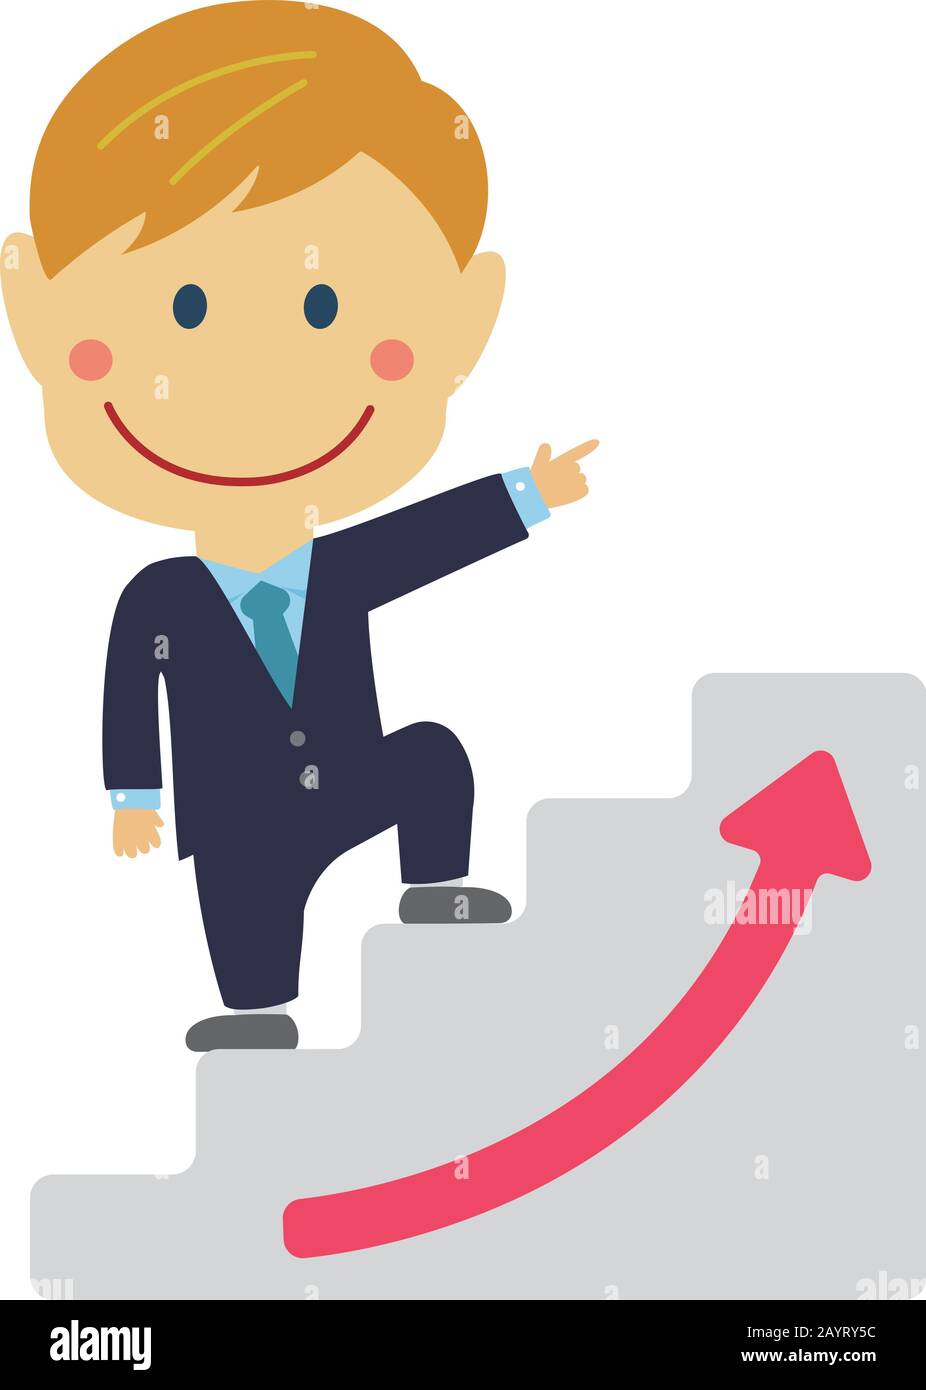 deformed cartoon businessman illustration of going up the stairs aiming at success and career up ( caucasian worker) Stock Vector